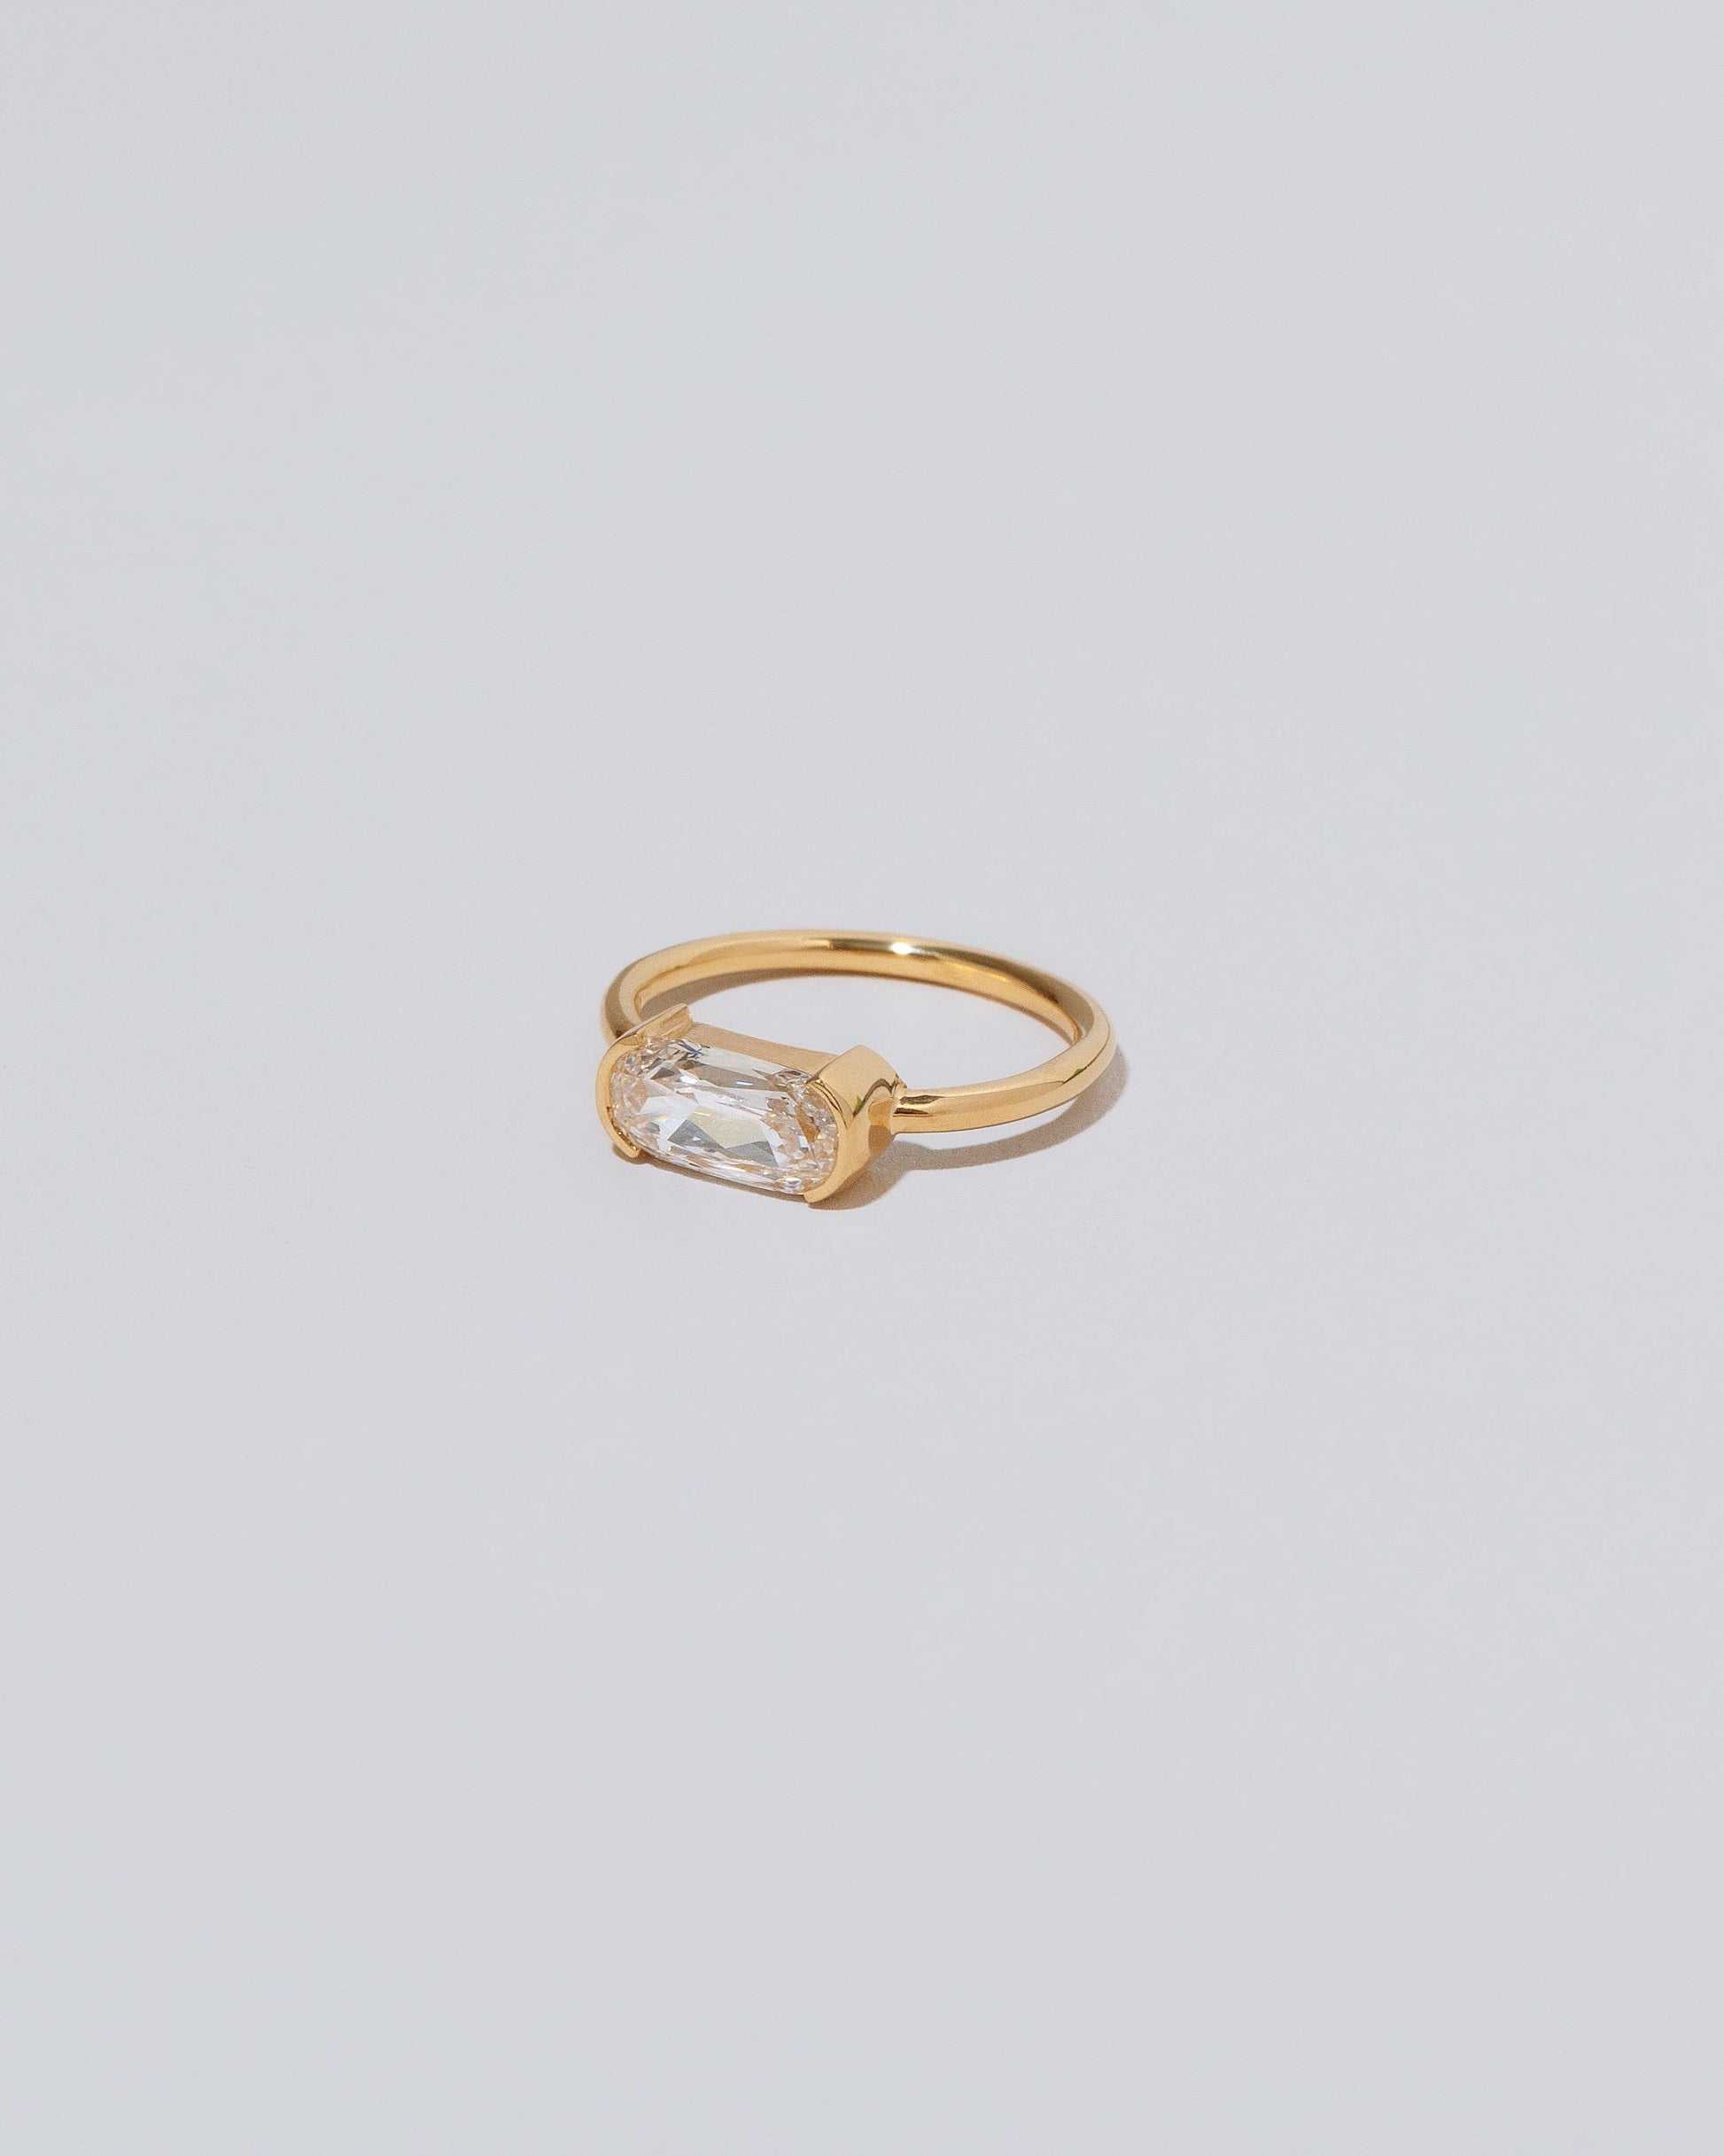 Product photo of the Passé Ring on light color background